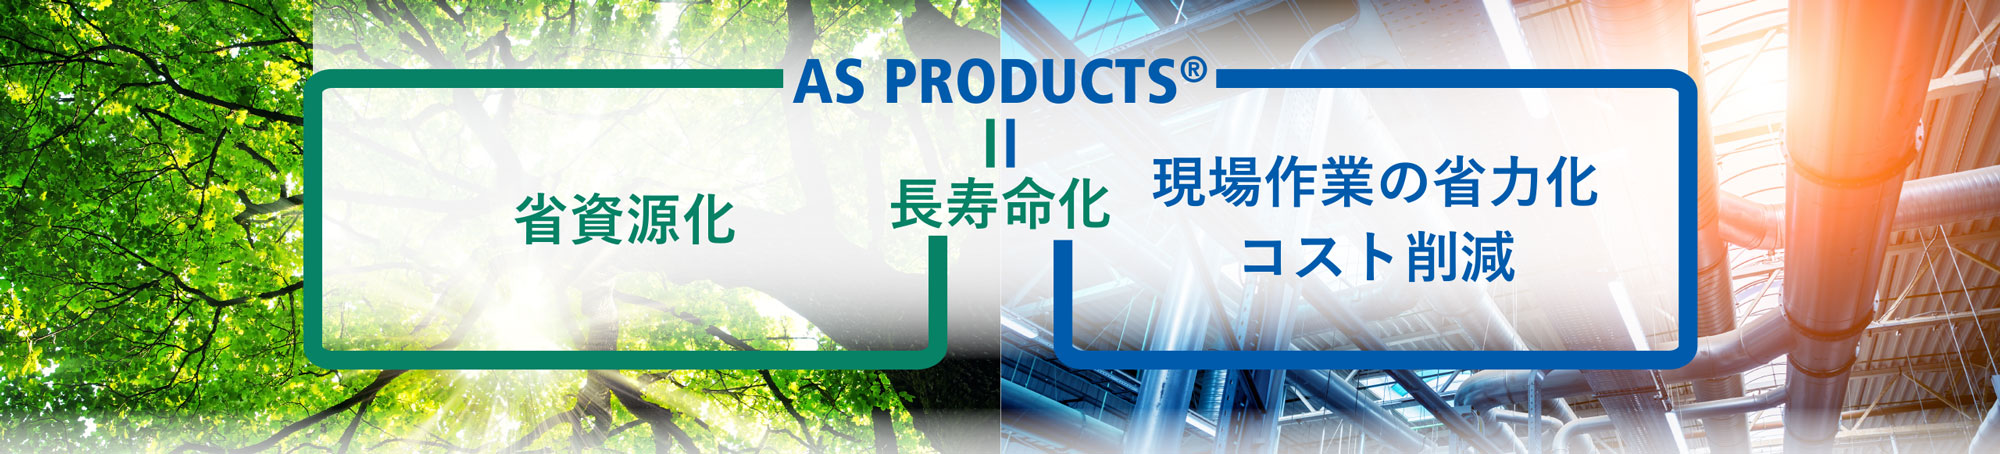 AS PRODUCTS | 旭化成アドバンス株式会社